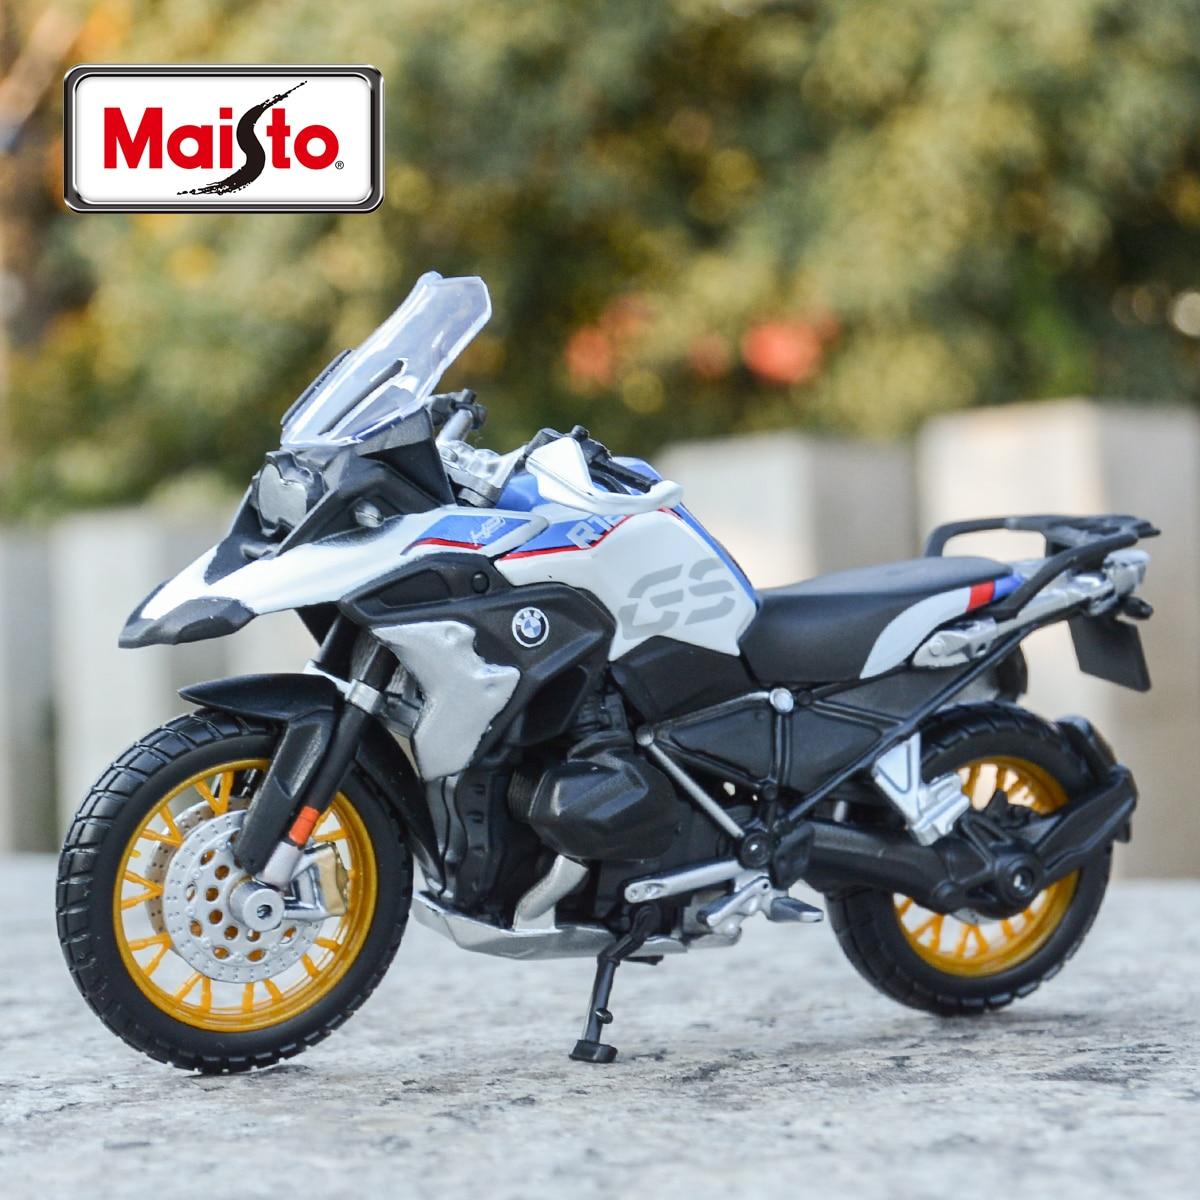 Maisto-1-18-BMW-R1250-GS-Static-Die-Cast-Vehicles-Collectible-Hobbies-Motorcycle-Model-Toys.jpg